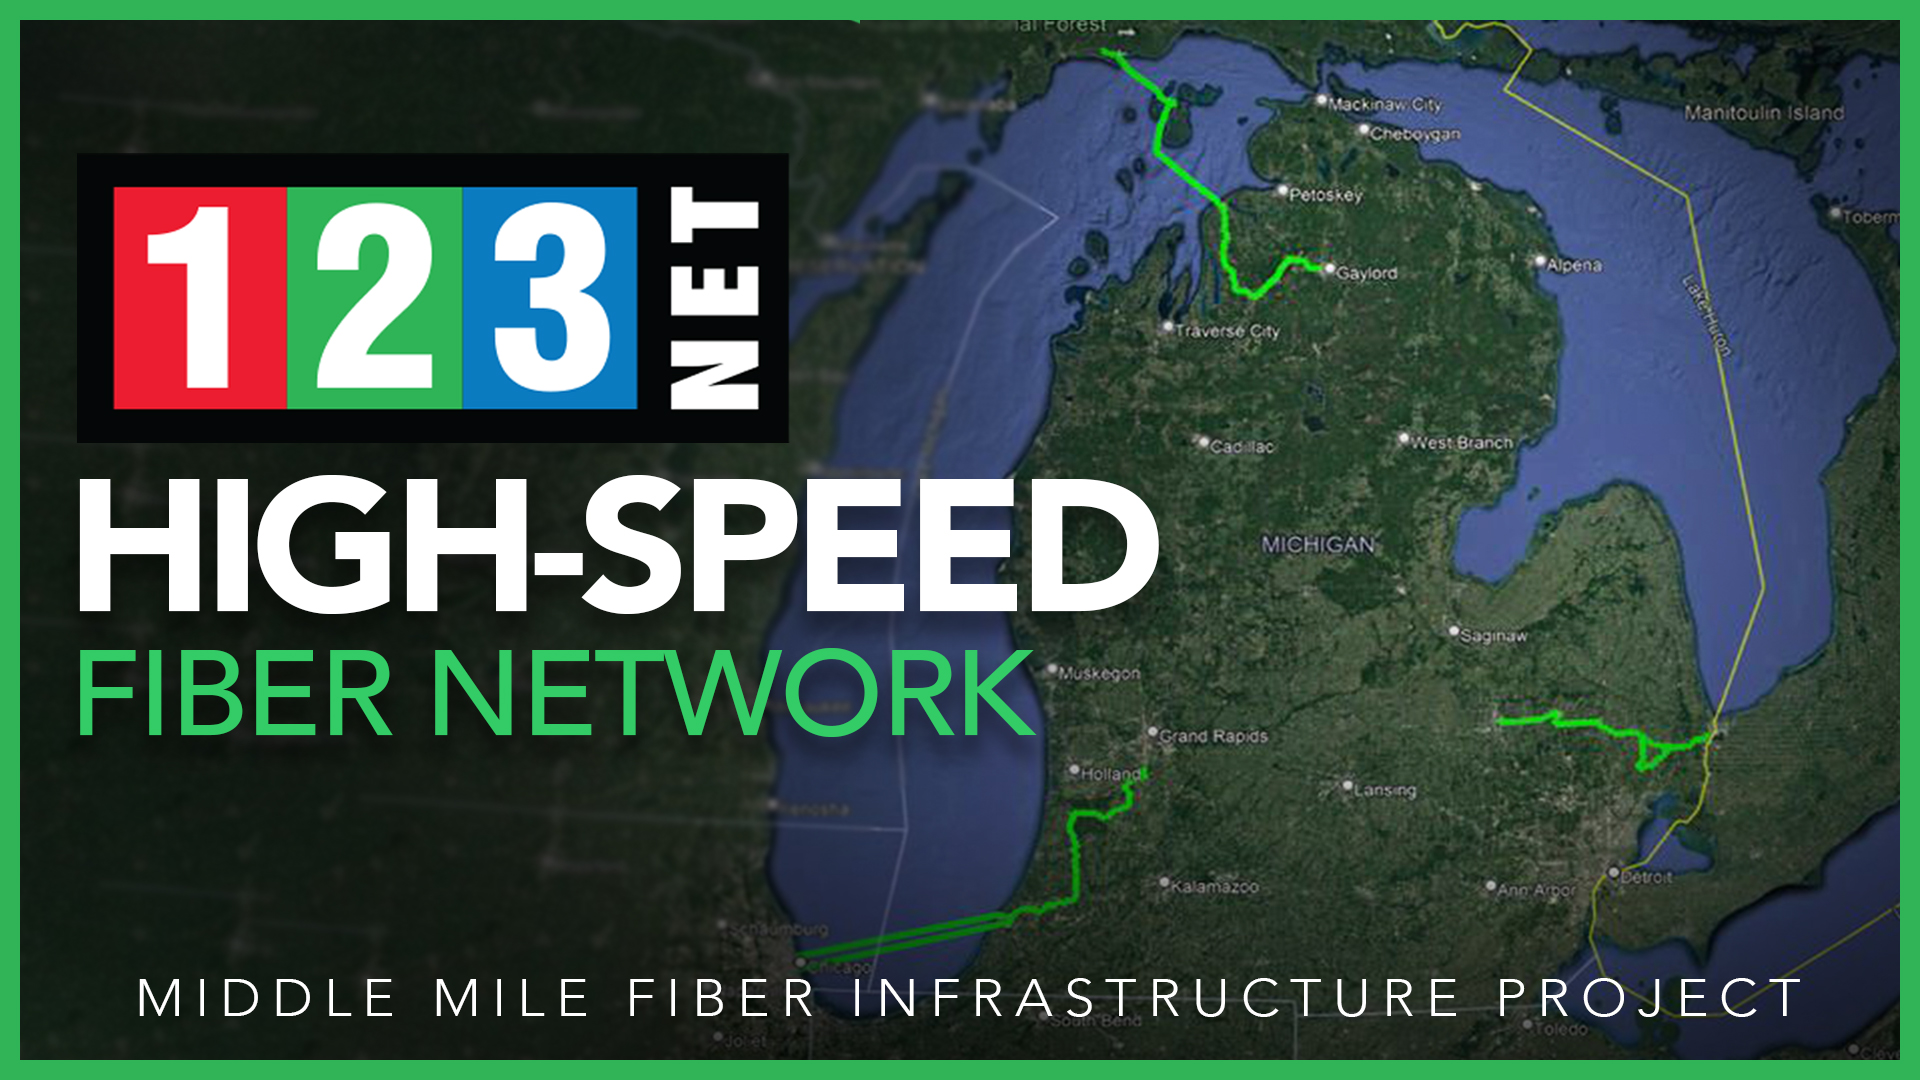 123NET Announces its Participation in $87.5 Million Project for Middle Mile Connectivity in Michigan